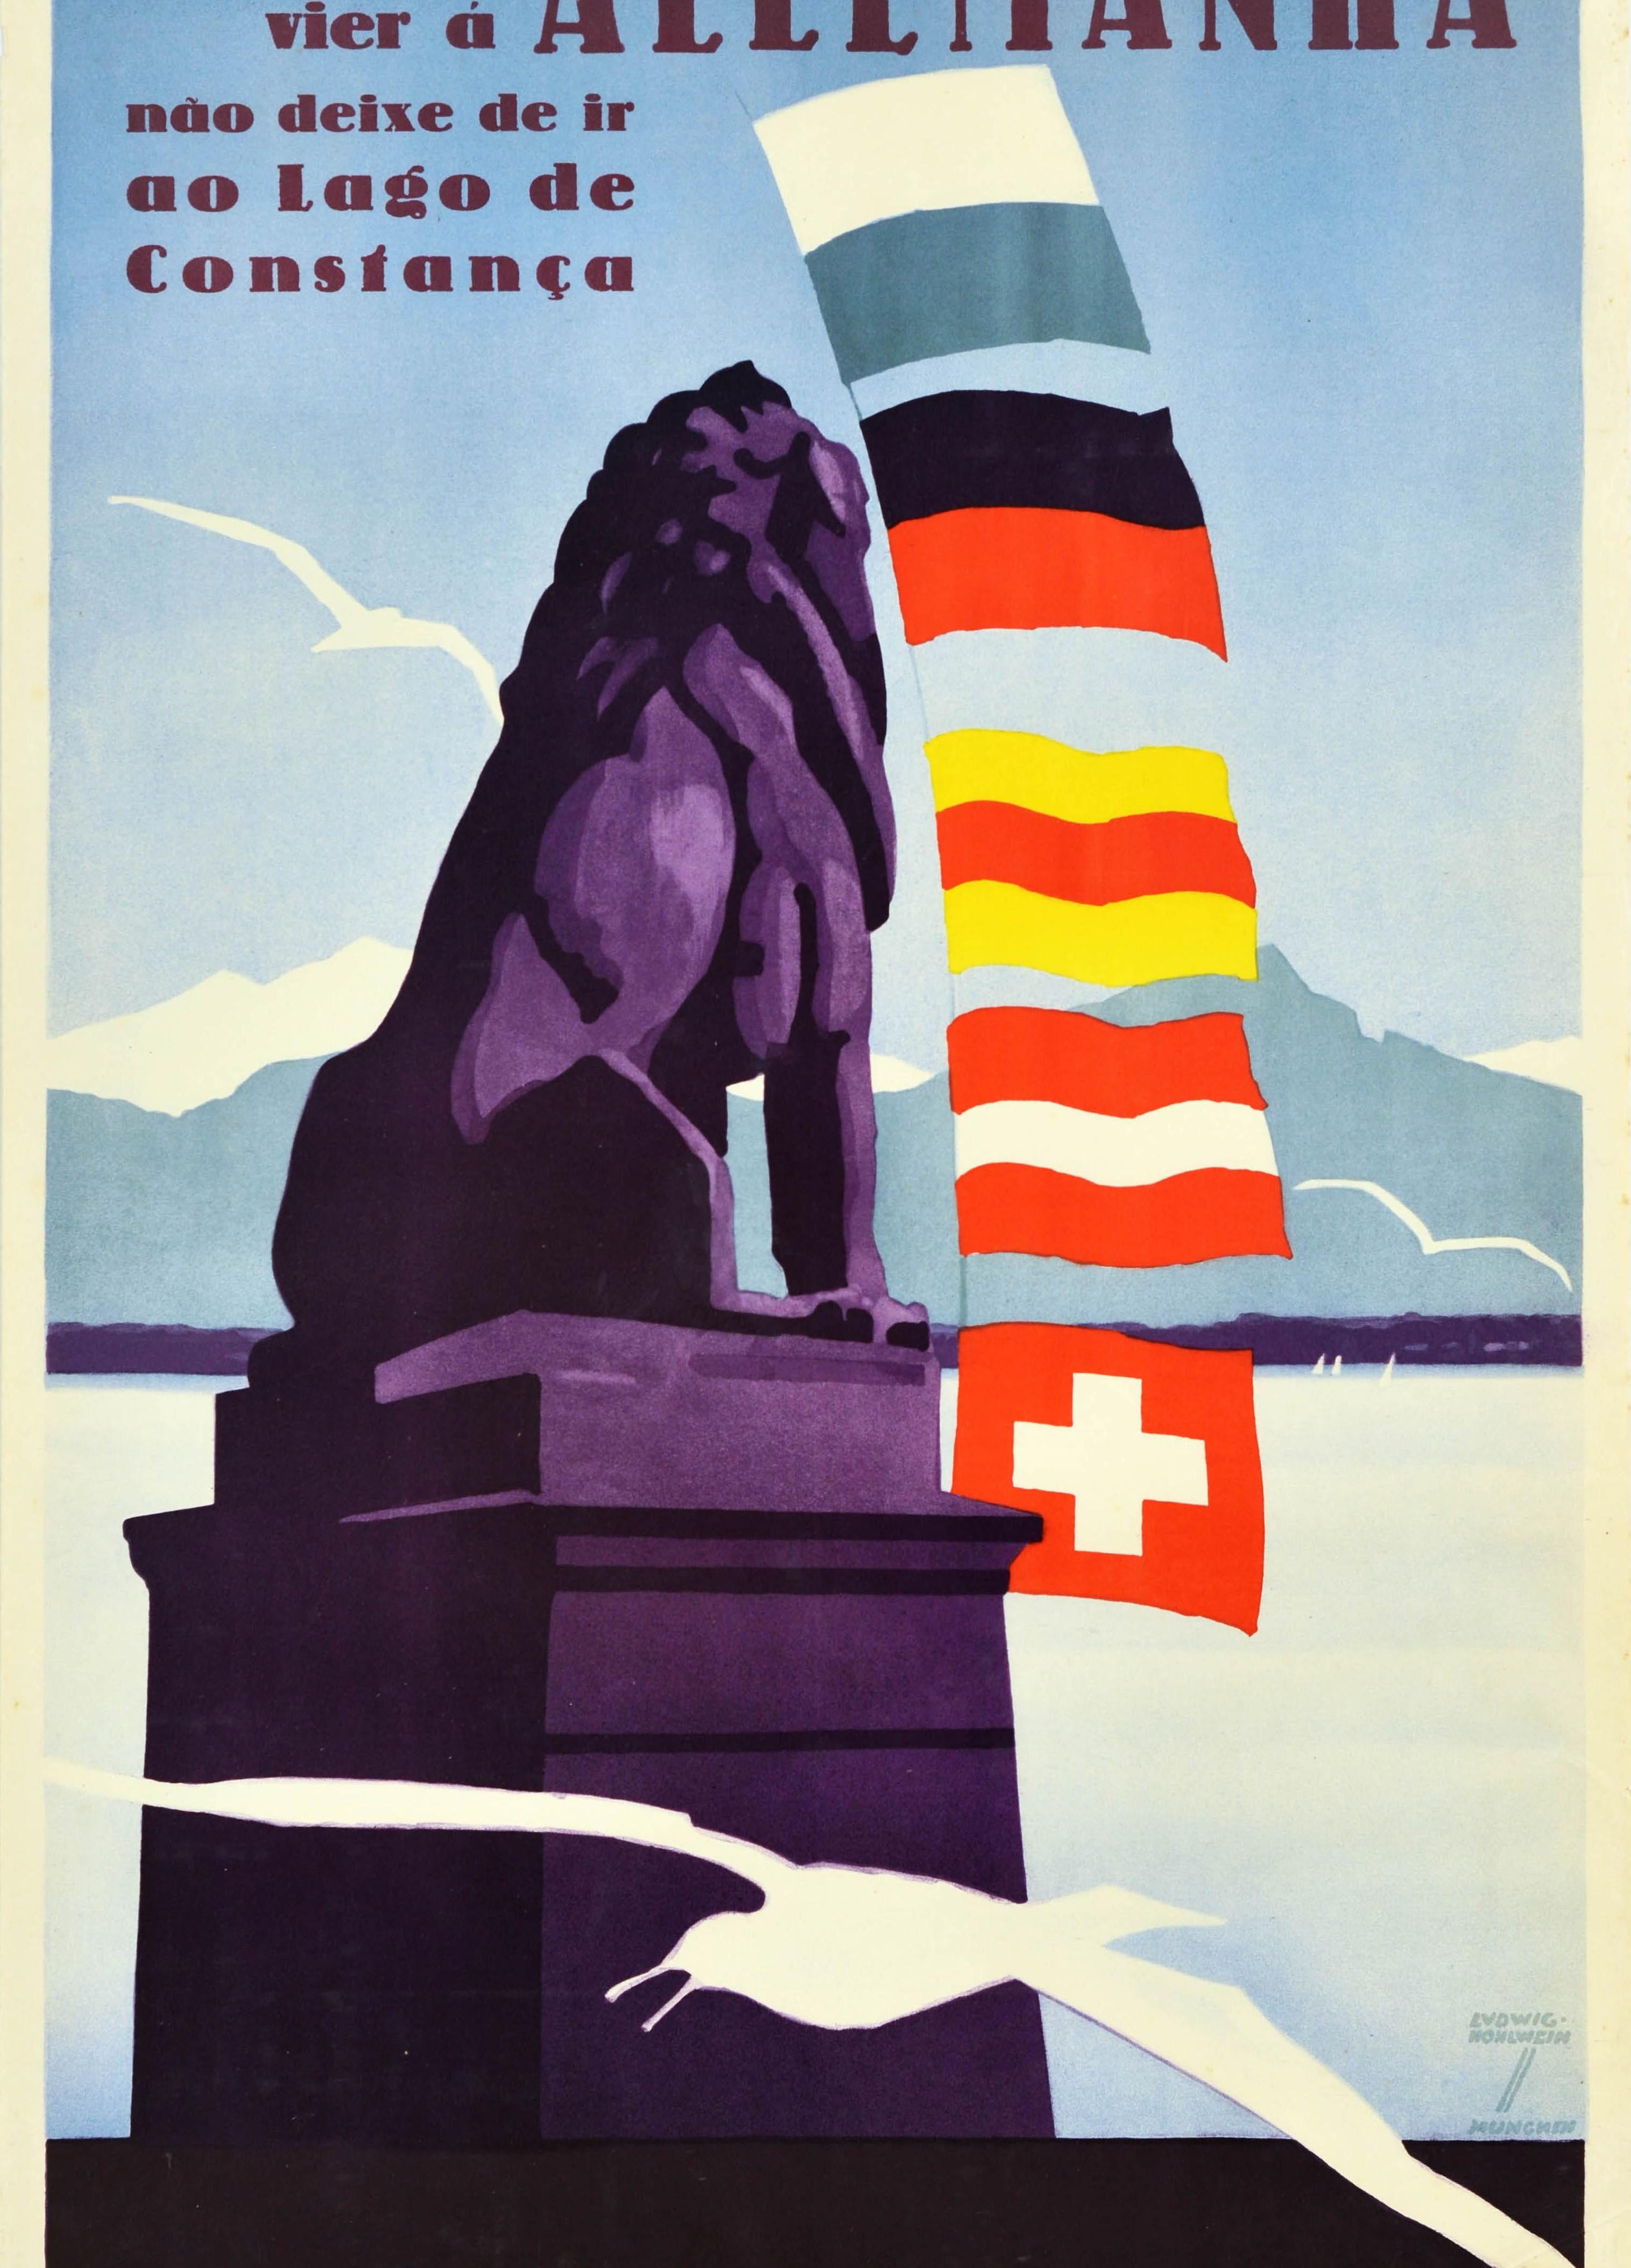 Original Vintage Travel Poster Allemanha Lake Constance Mountains Bavaria Lion In Good Condition For Sale In London, GB